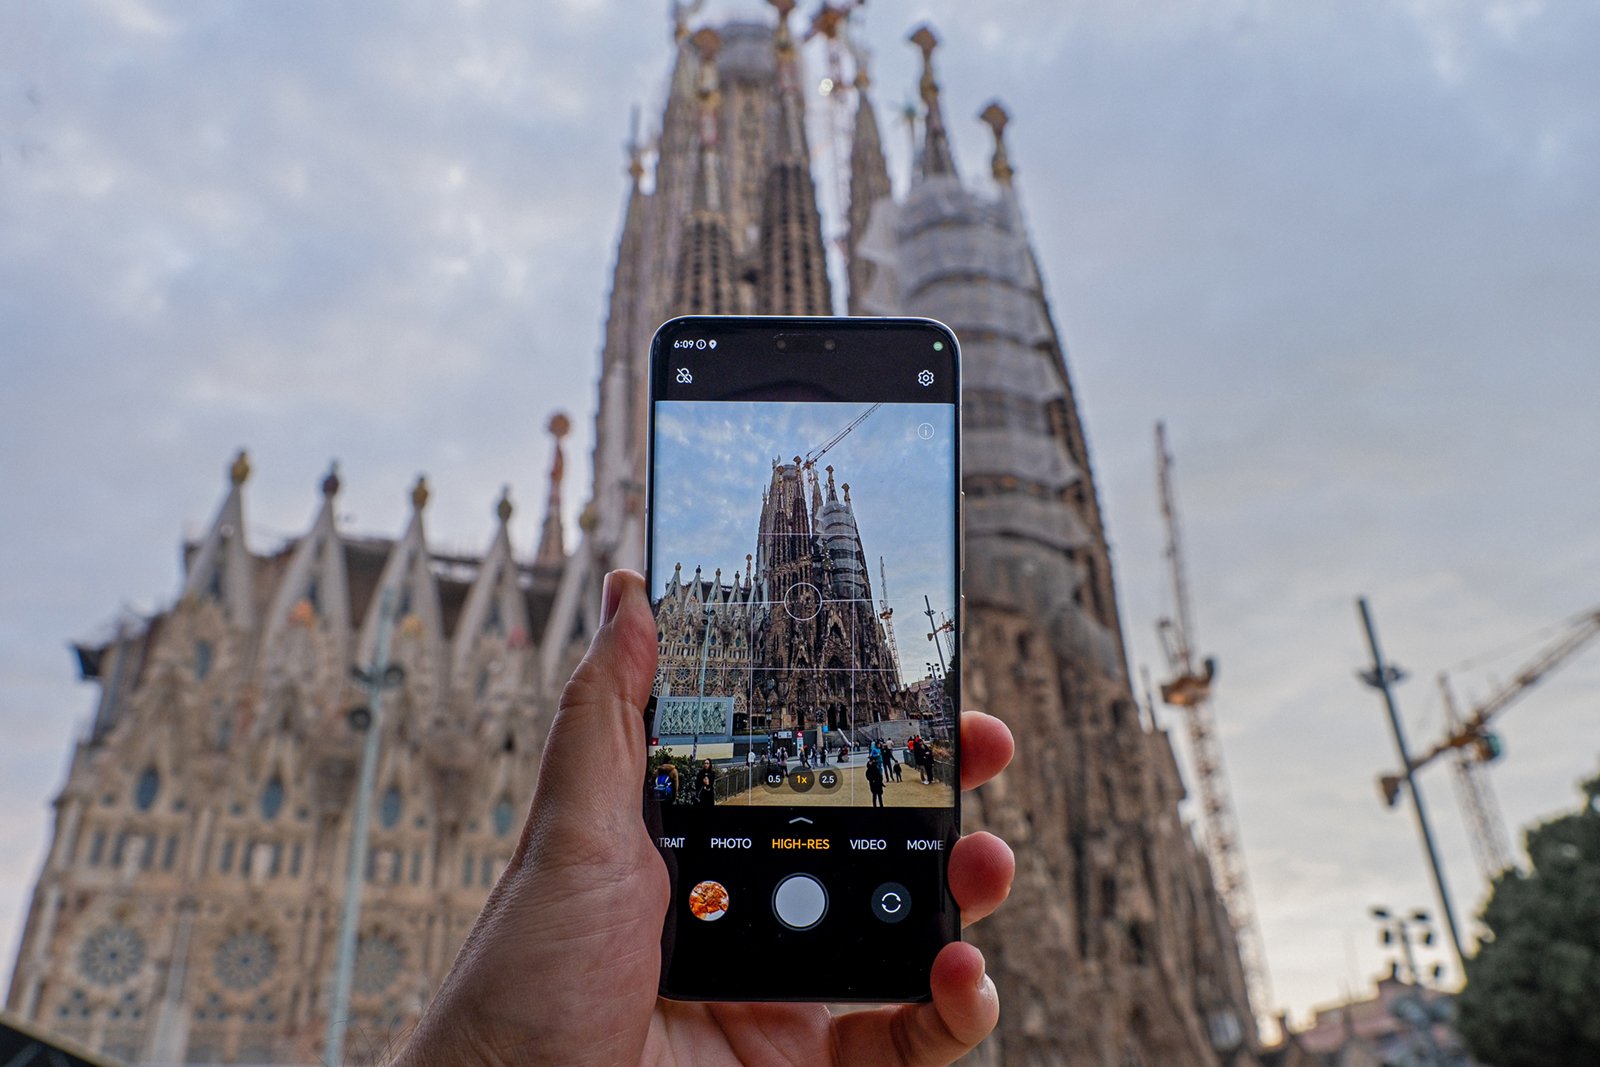 A hand holding a smartphone capturing a photo of the sagrada familia in barcelona, displayed on the phone screen, with the actual cathedral blurred in the background.